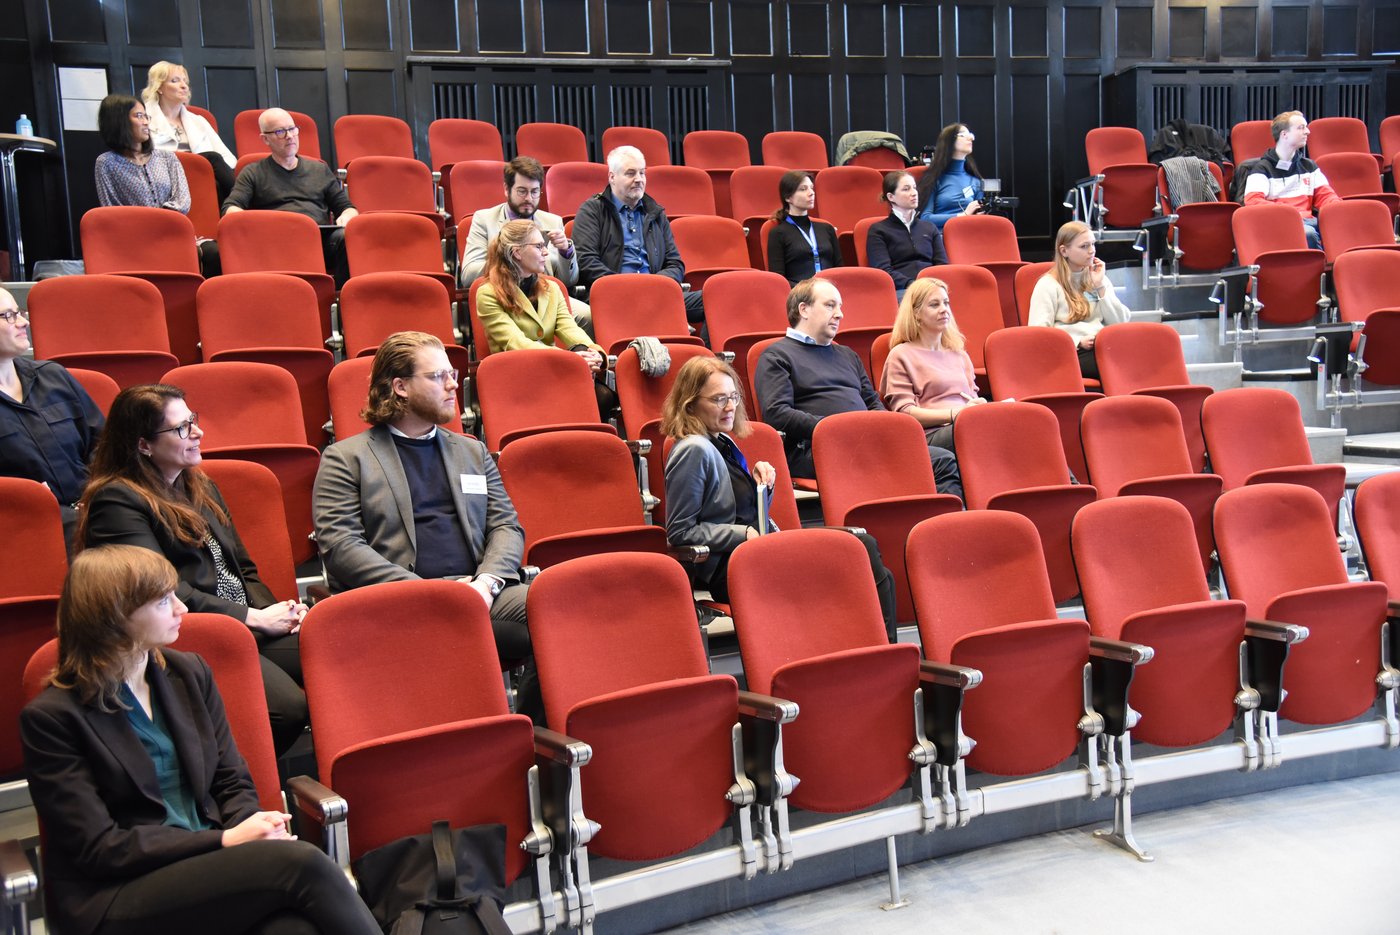 The picture shows the audience in the historic lecture hall on red upholstered folding seats in front of dark-panelled wooden walls.